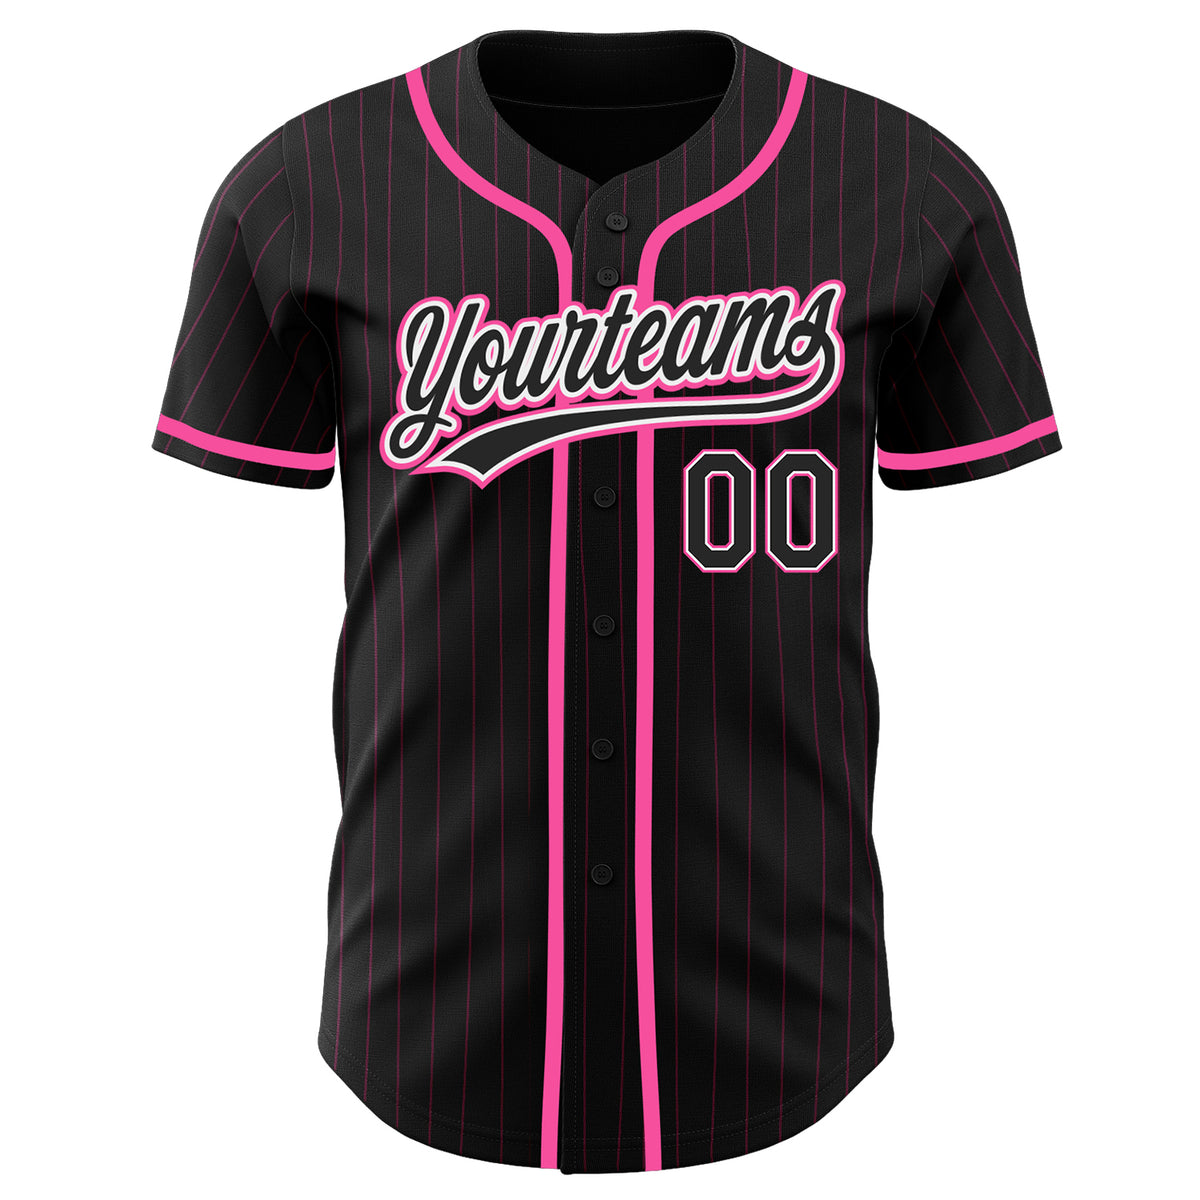 Shop black with white pinstripe baseball button jersey for women from our  clothing and apparel online shopping store